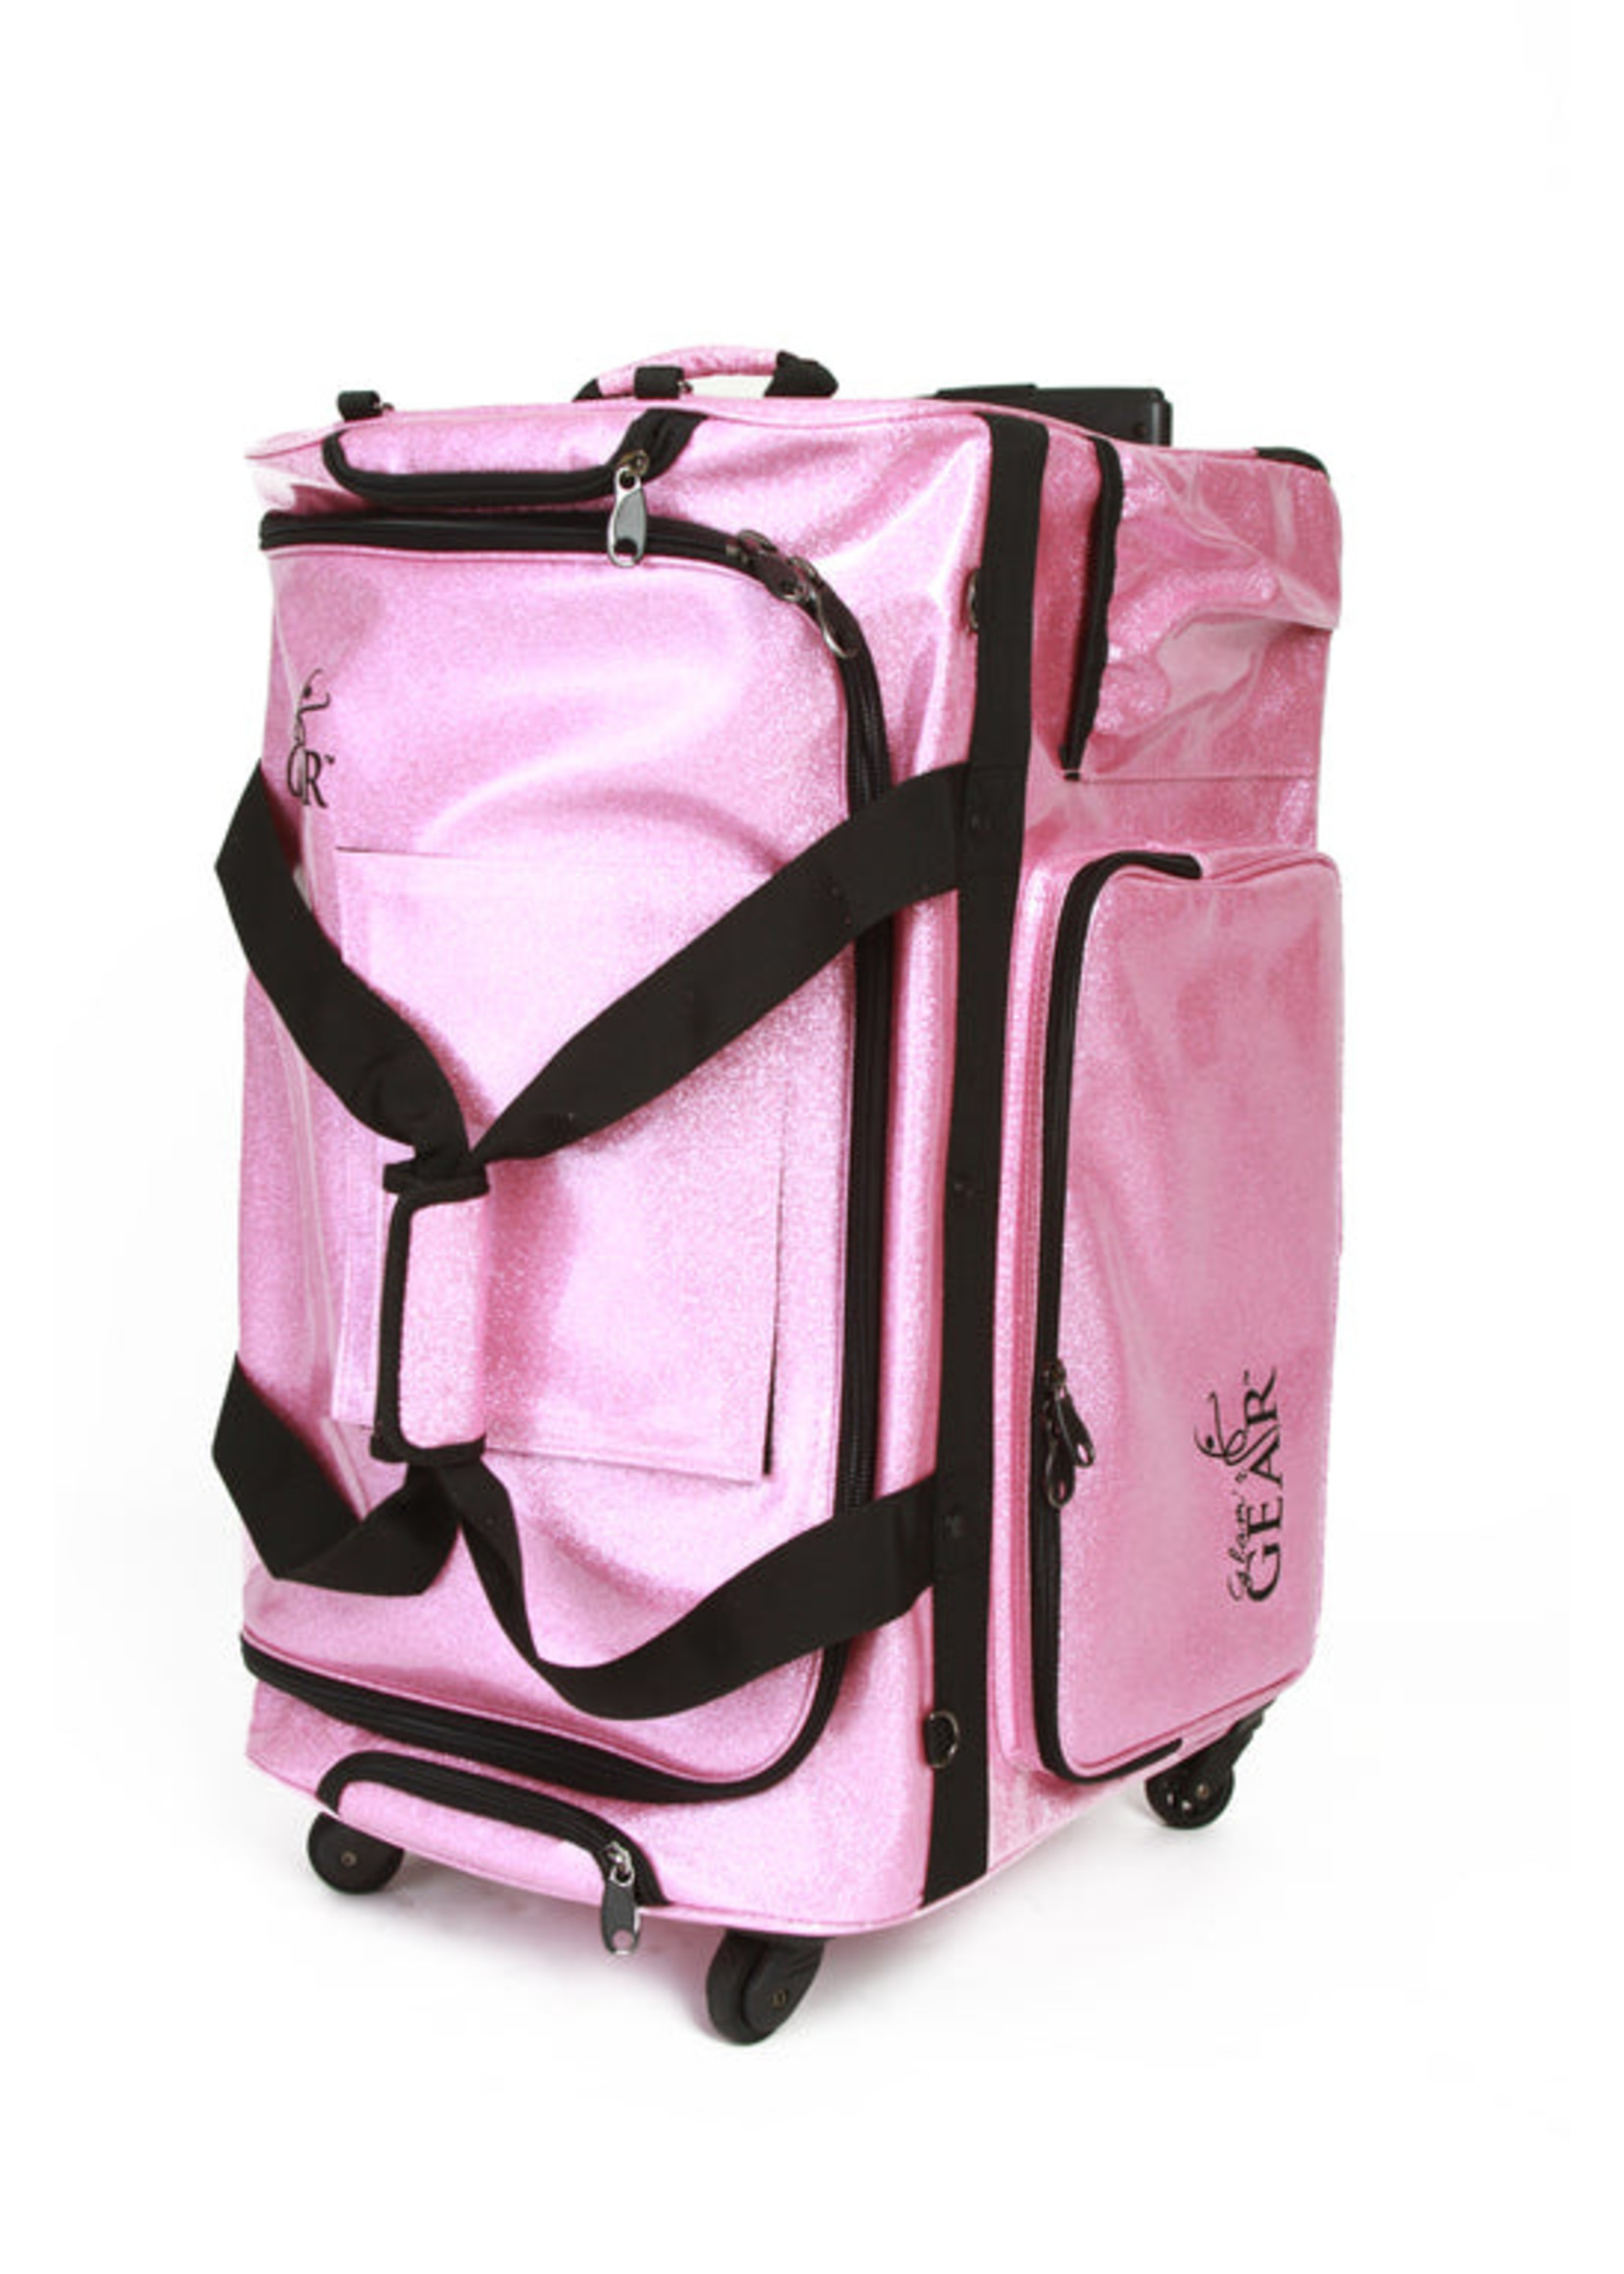 GLAM'R GEAR GLAM’R GEAR LARGE GLITTER CHANGING STATION TRAVEL BAG WITH RACK